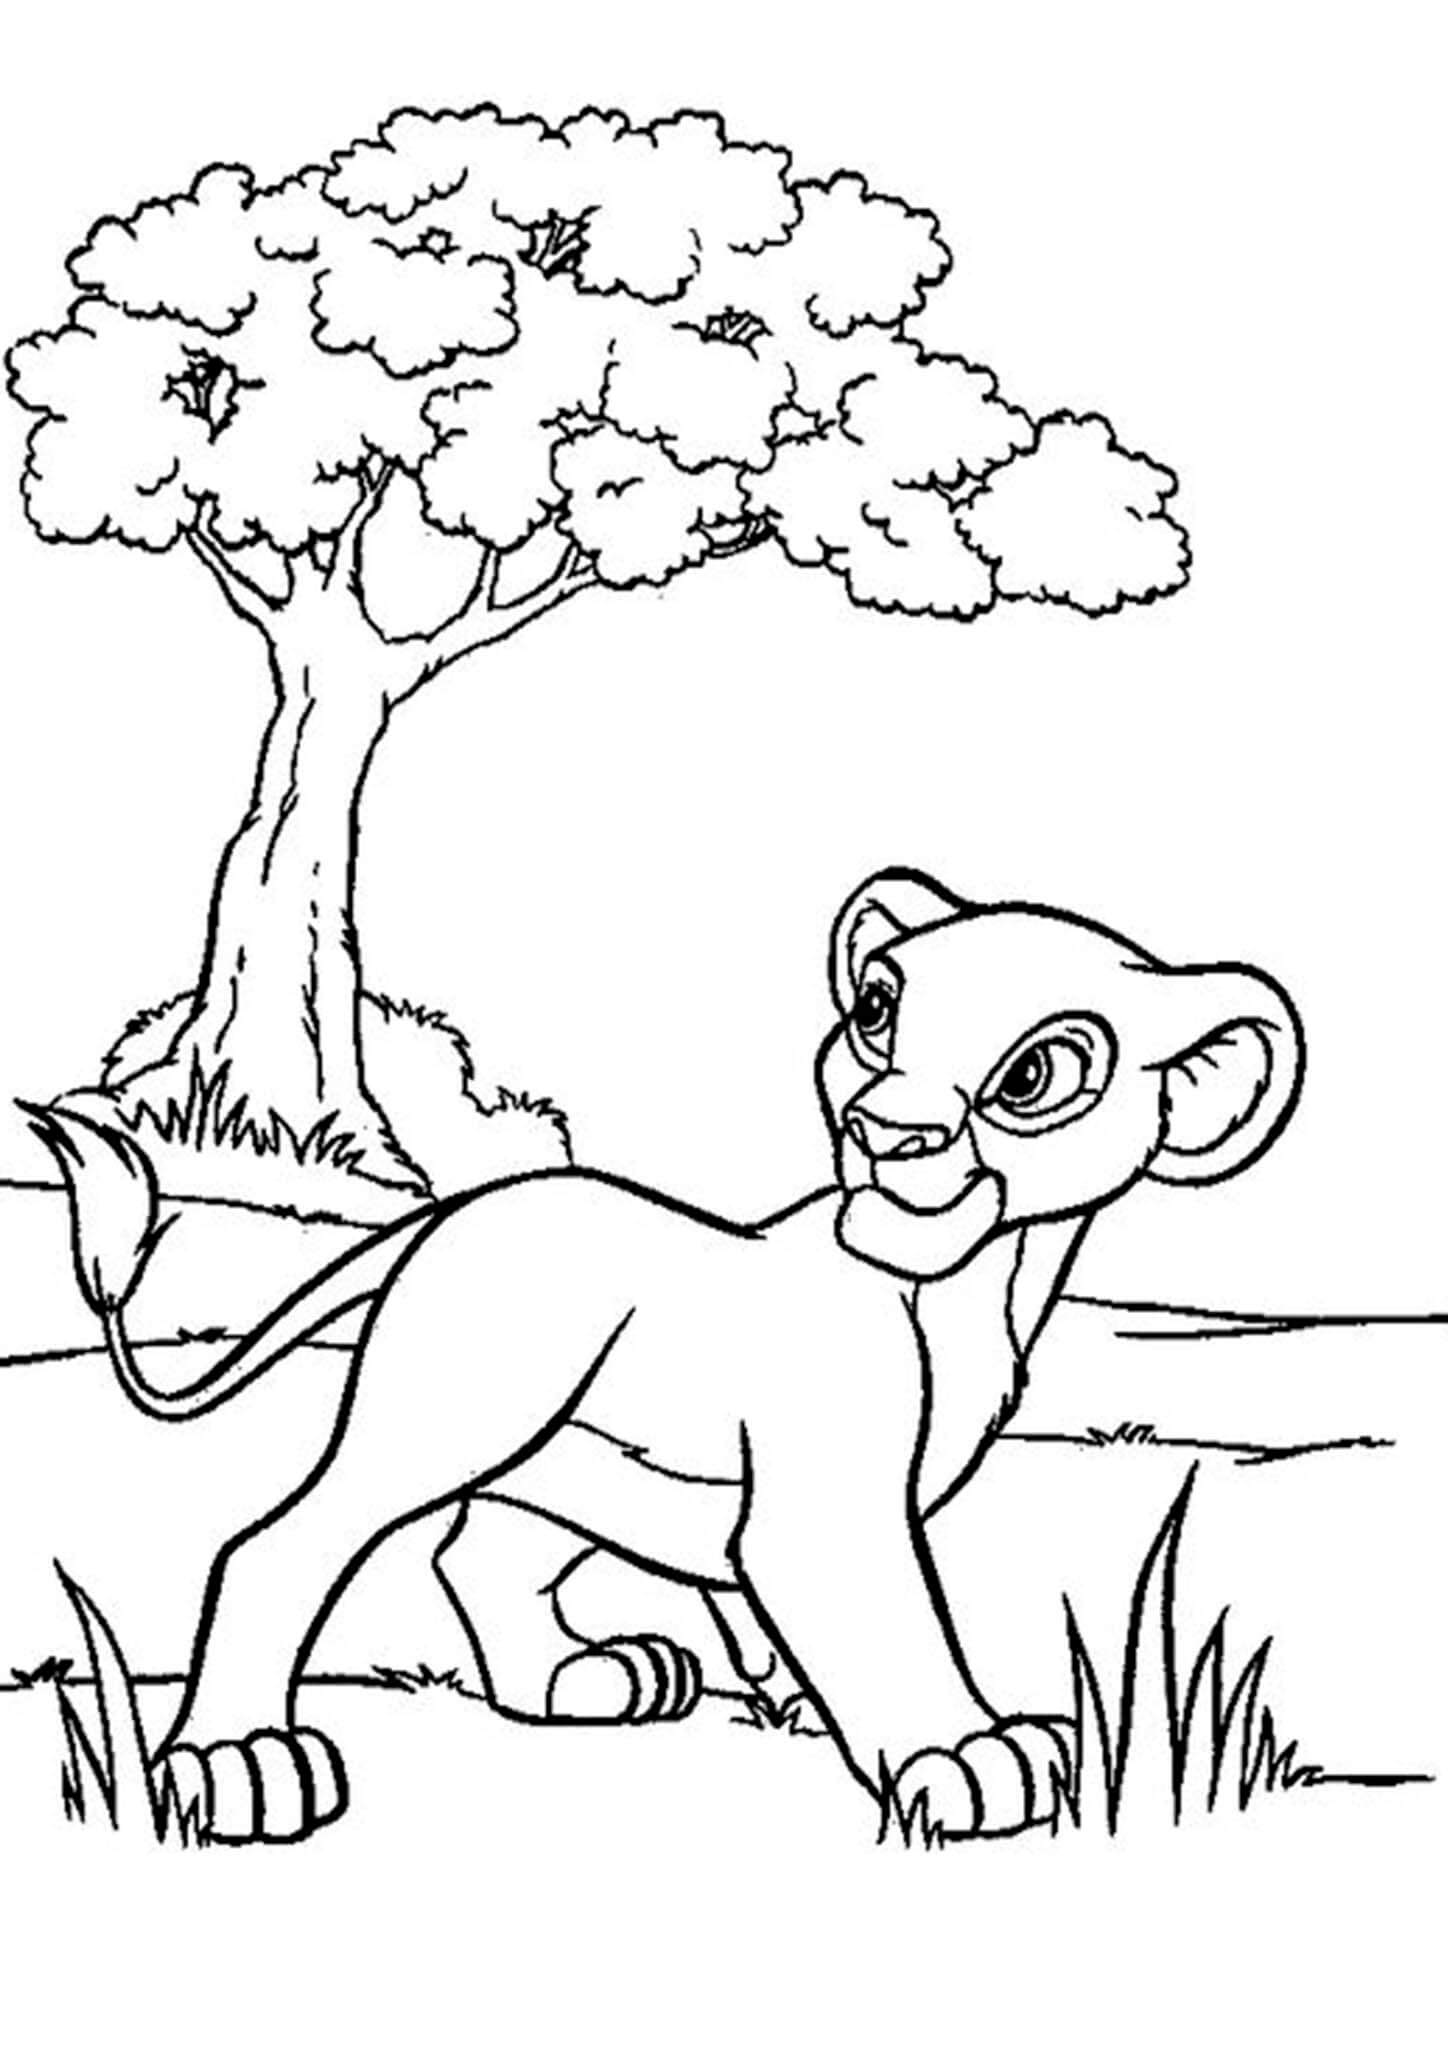 cute lion king coloring pages